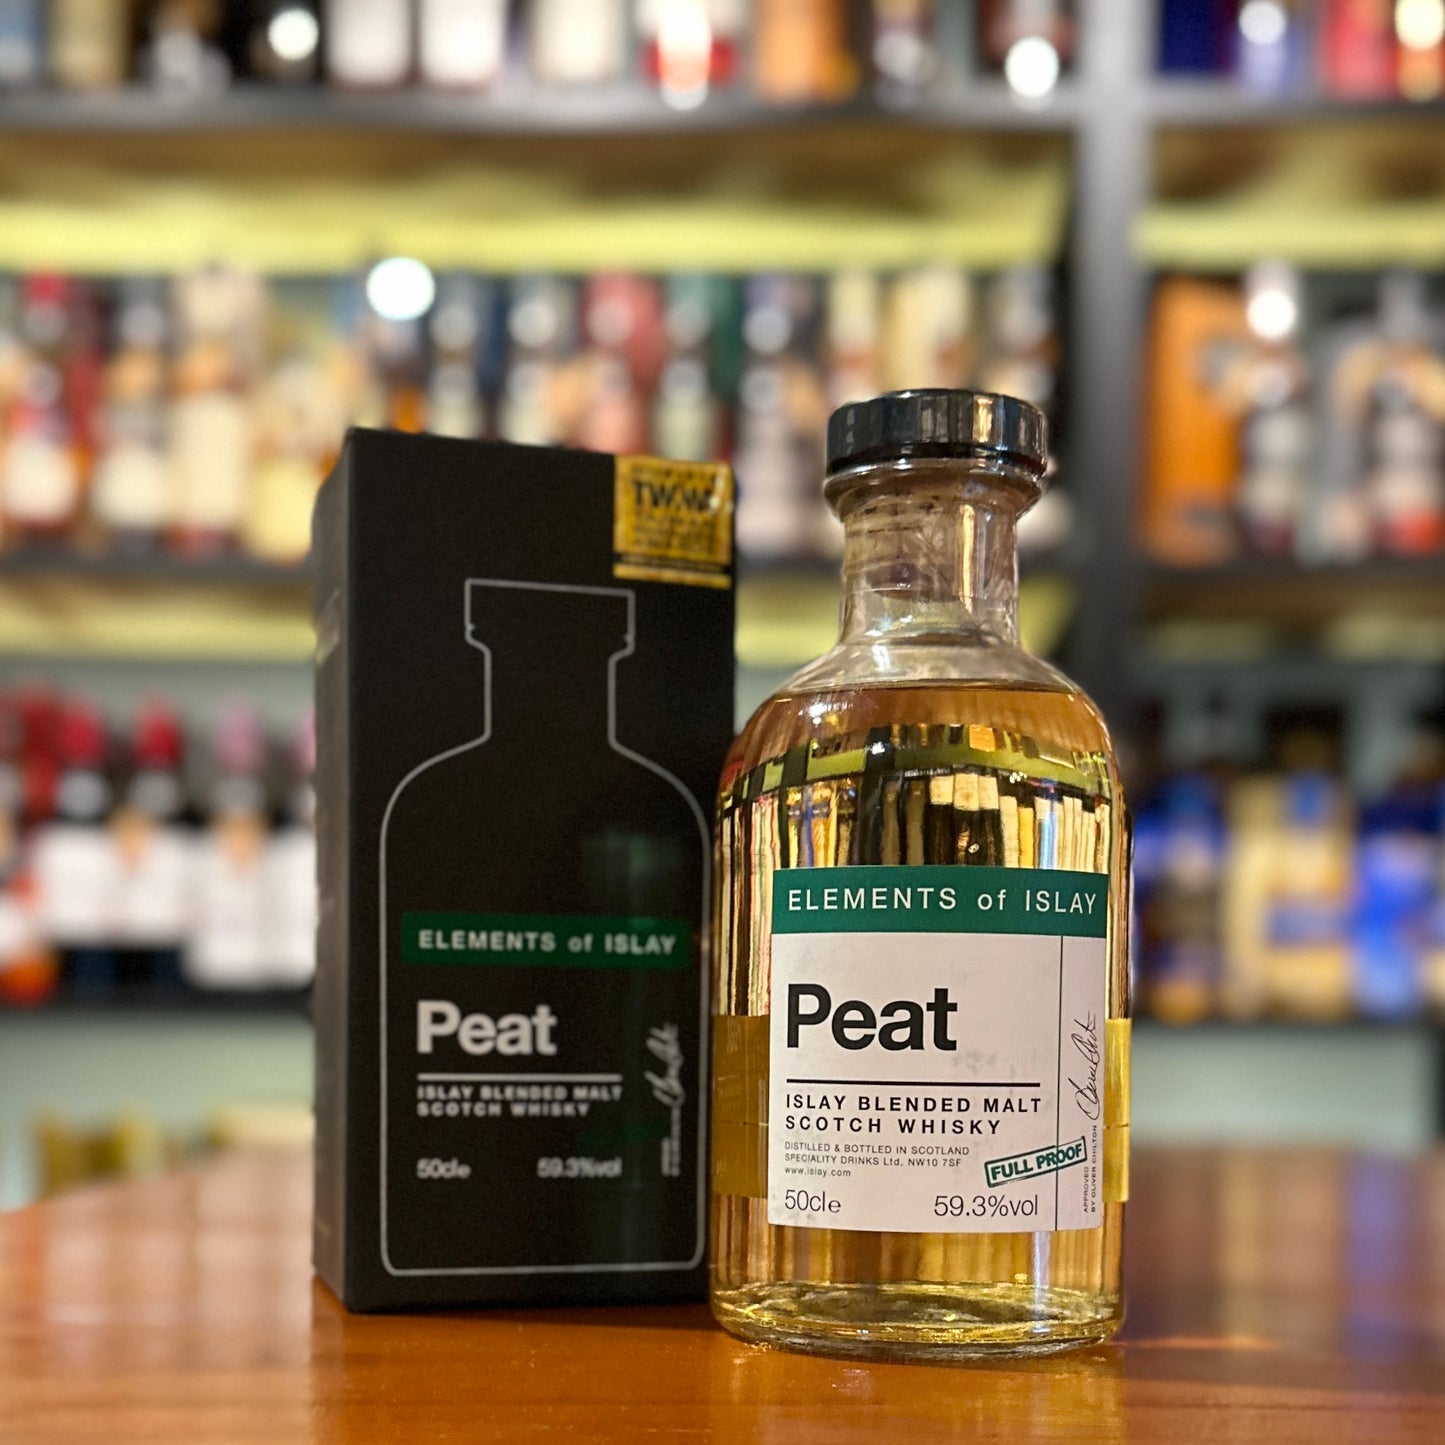 Elements of Islay Peat Full Proof Blended Malt Scotch Whisky